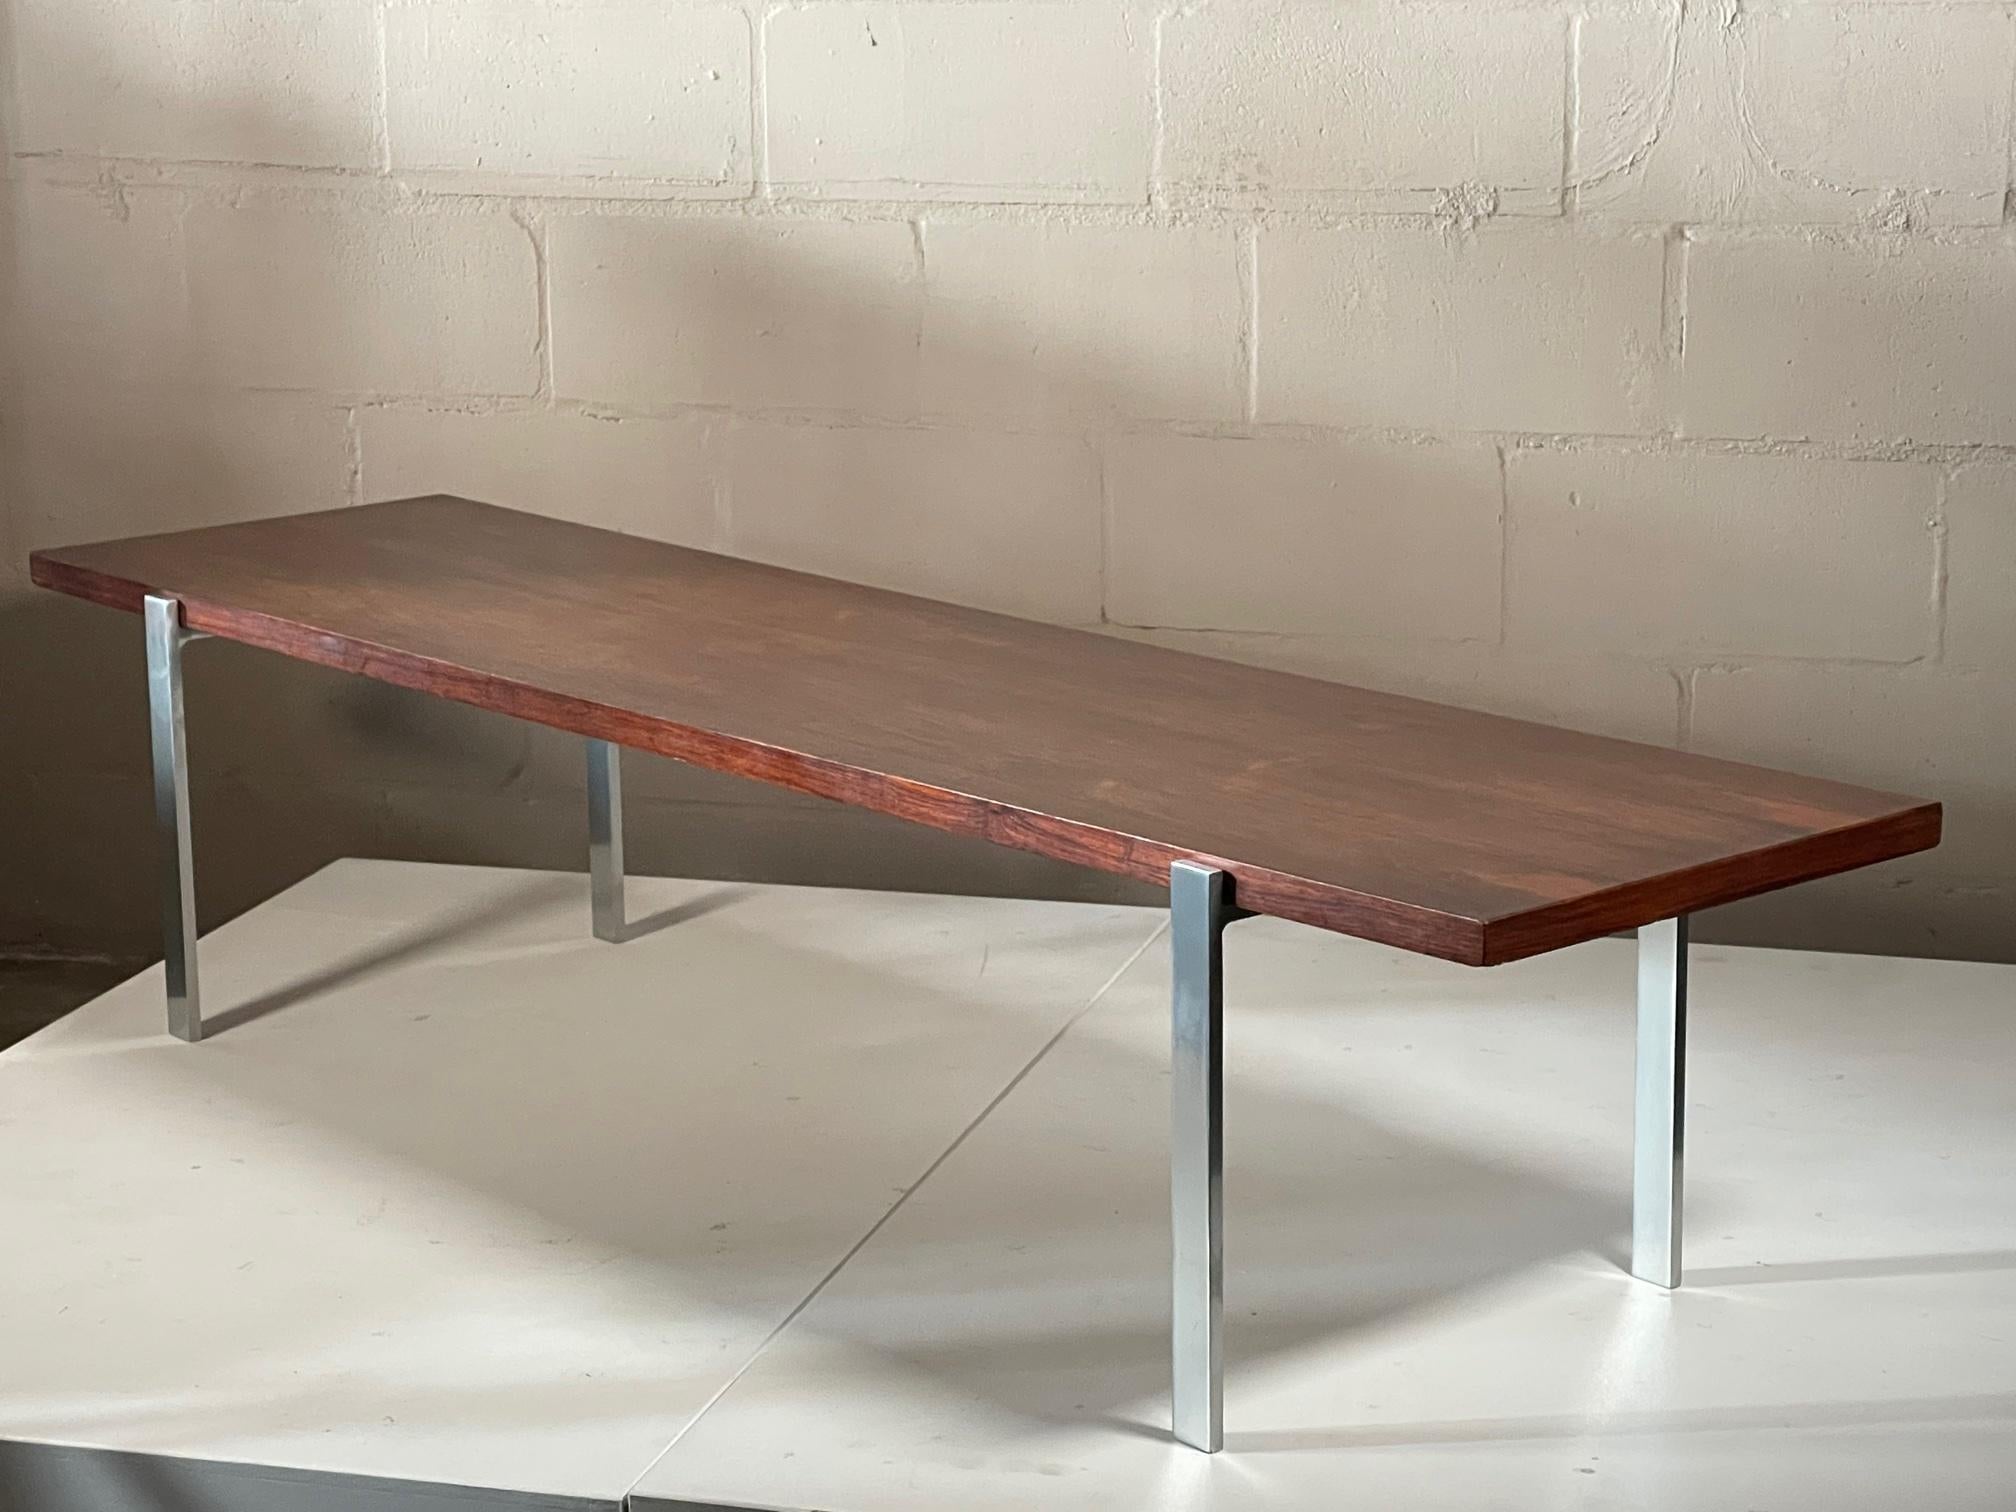 A Minimalist vintage bench or coffee table. Solid steel and rosewood, heavy and well made, circa 1960s. Rosewood top has a nice patina and bookmatched graining.